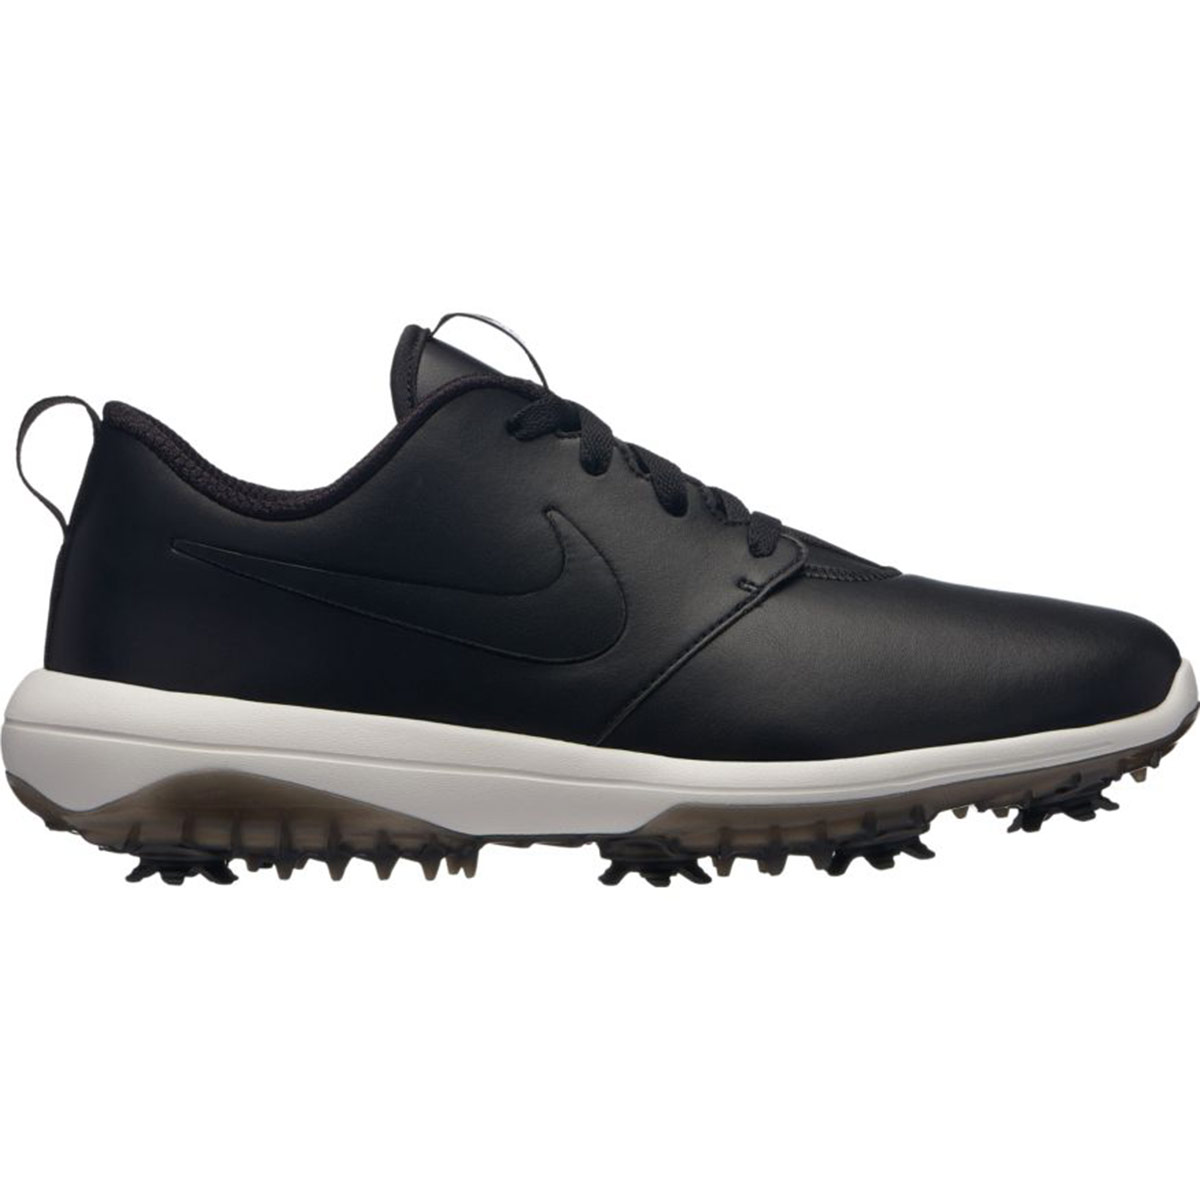 nike roshe spiked golf shoes